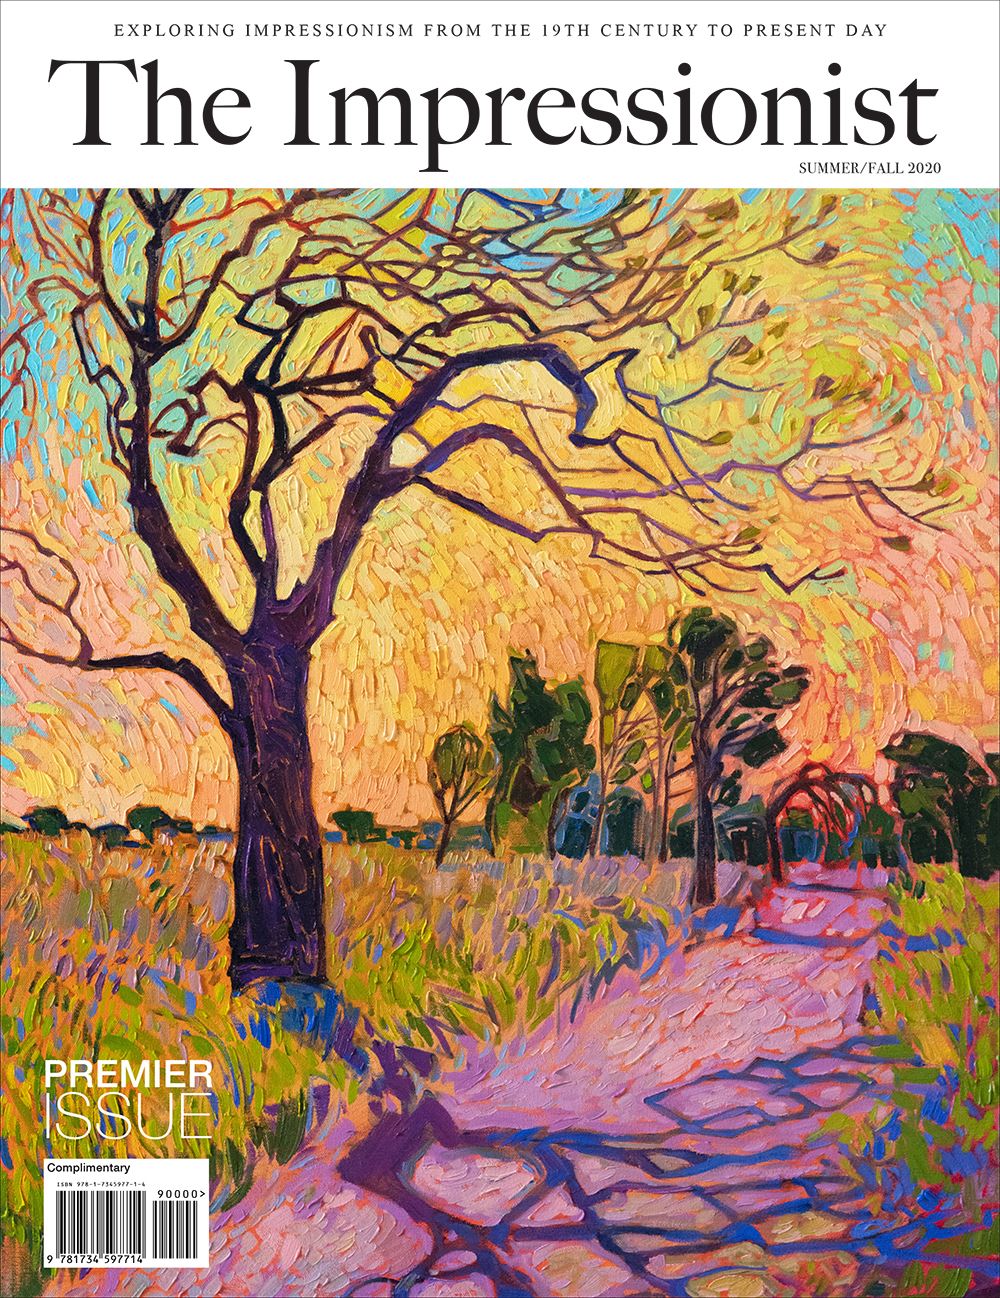  The Impressionist Magazine Read the premier issue of  The Impressionist&nbsp; and learn more about the advent of impressionism in Europe, as well as the development of post-impressionism and contemporary impressionism. The authors searched for fascinating and little-known facts about the impressionists, and we hope you enjoy the articles! 